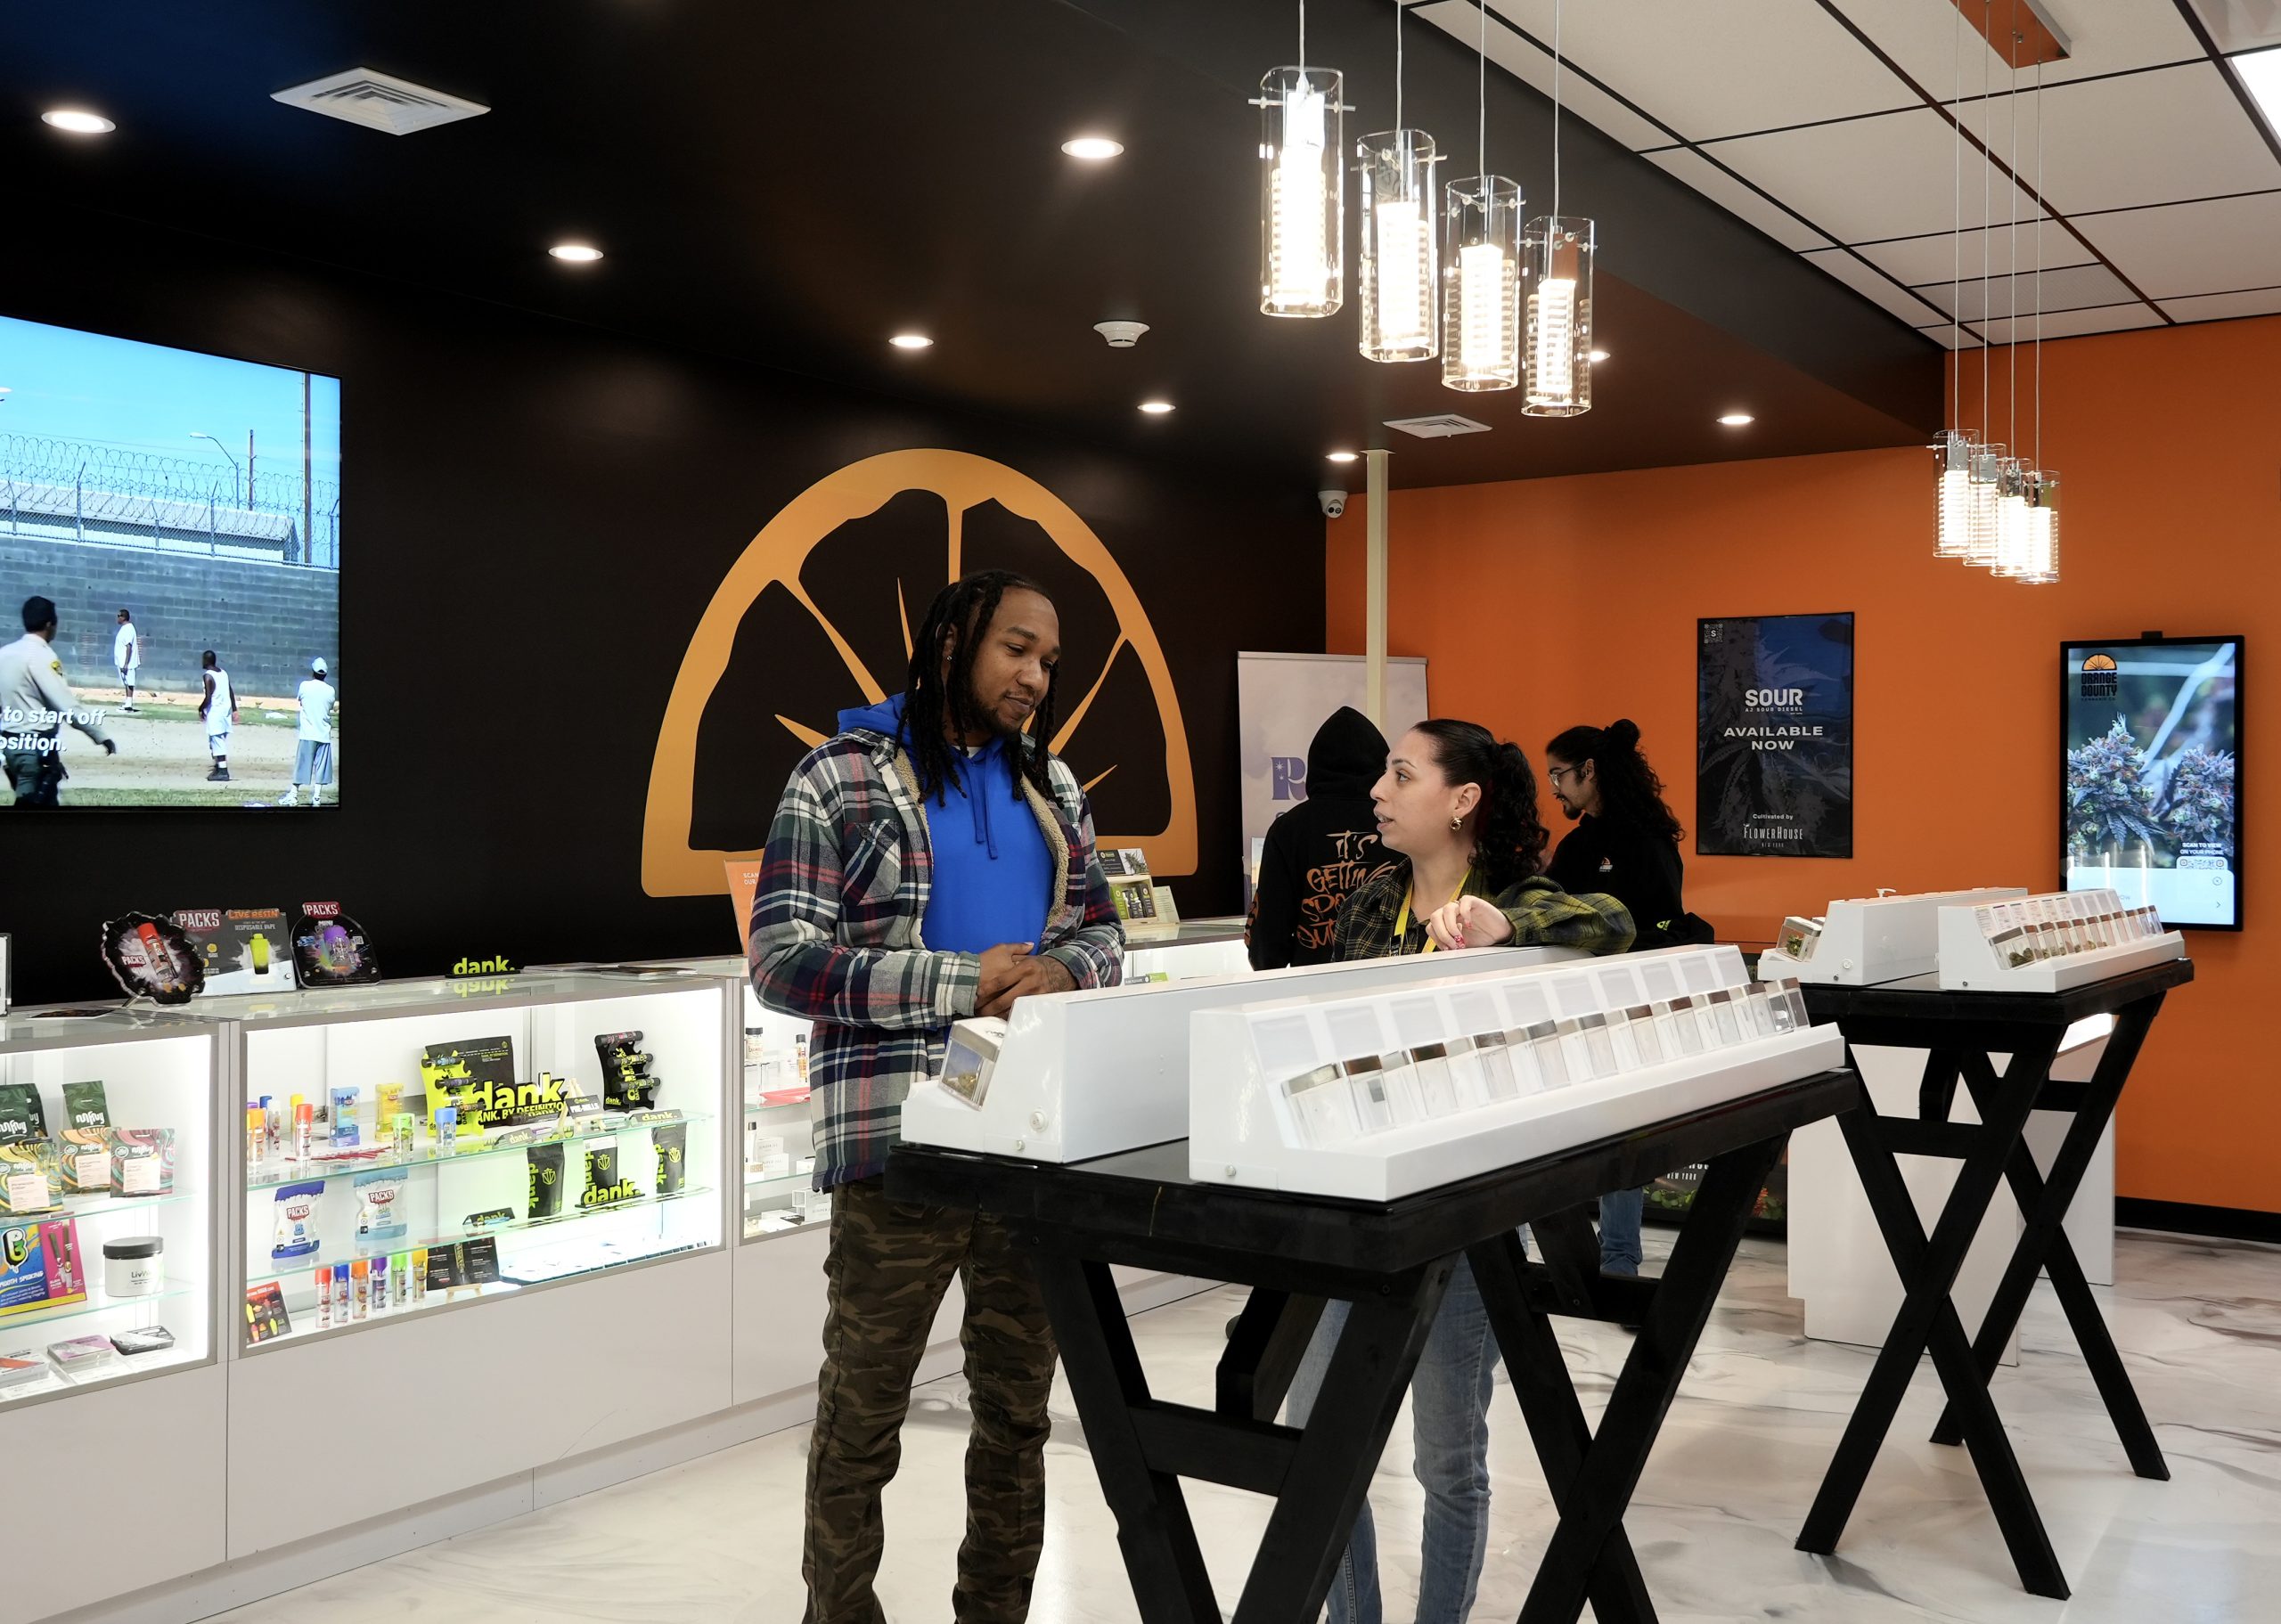 You are currently viewing A Guide to Quality, Education, and Empowerment at Orange County Cannabis Co.